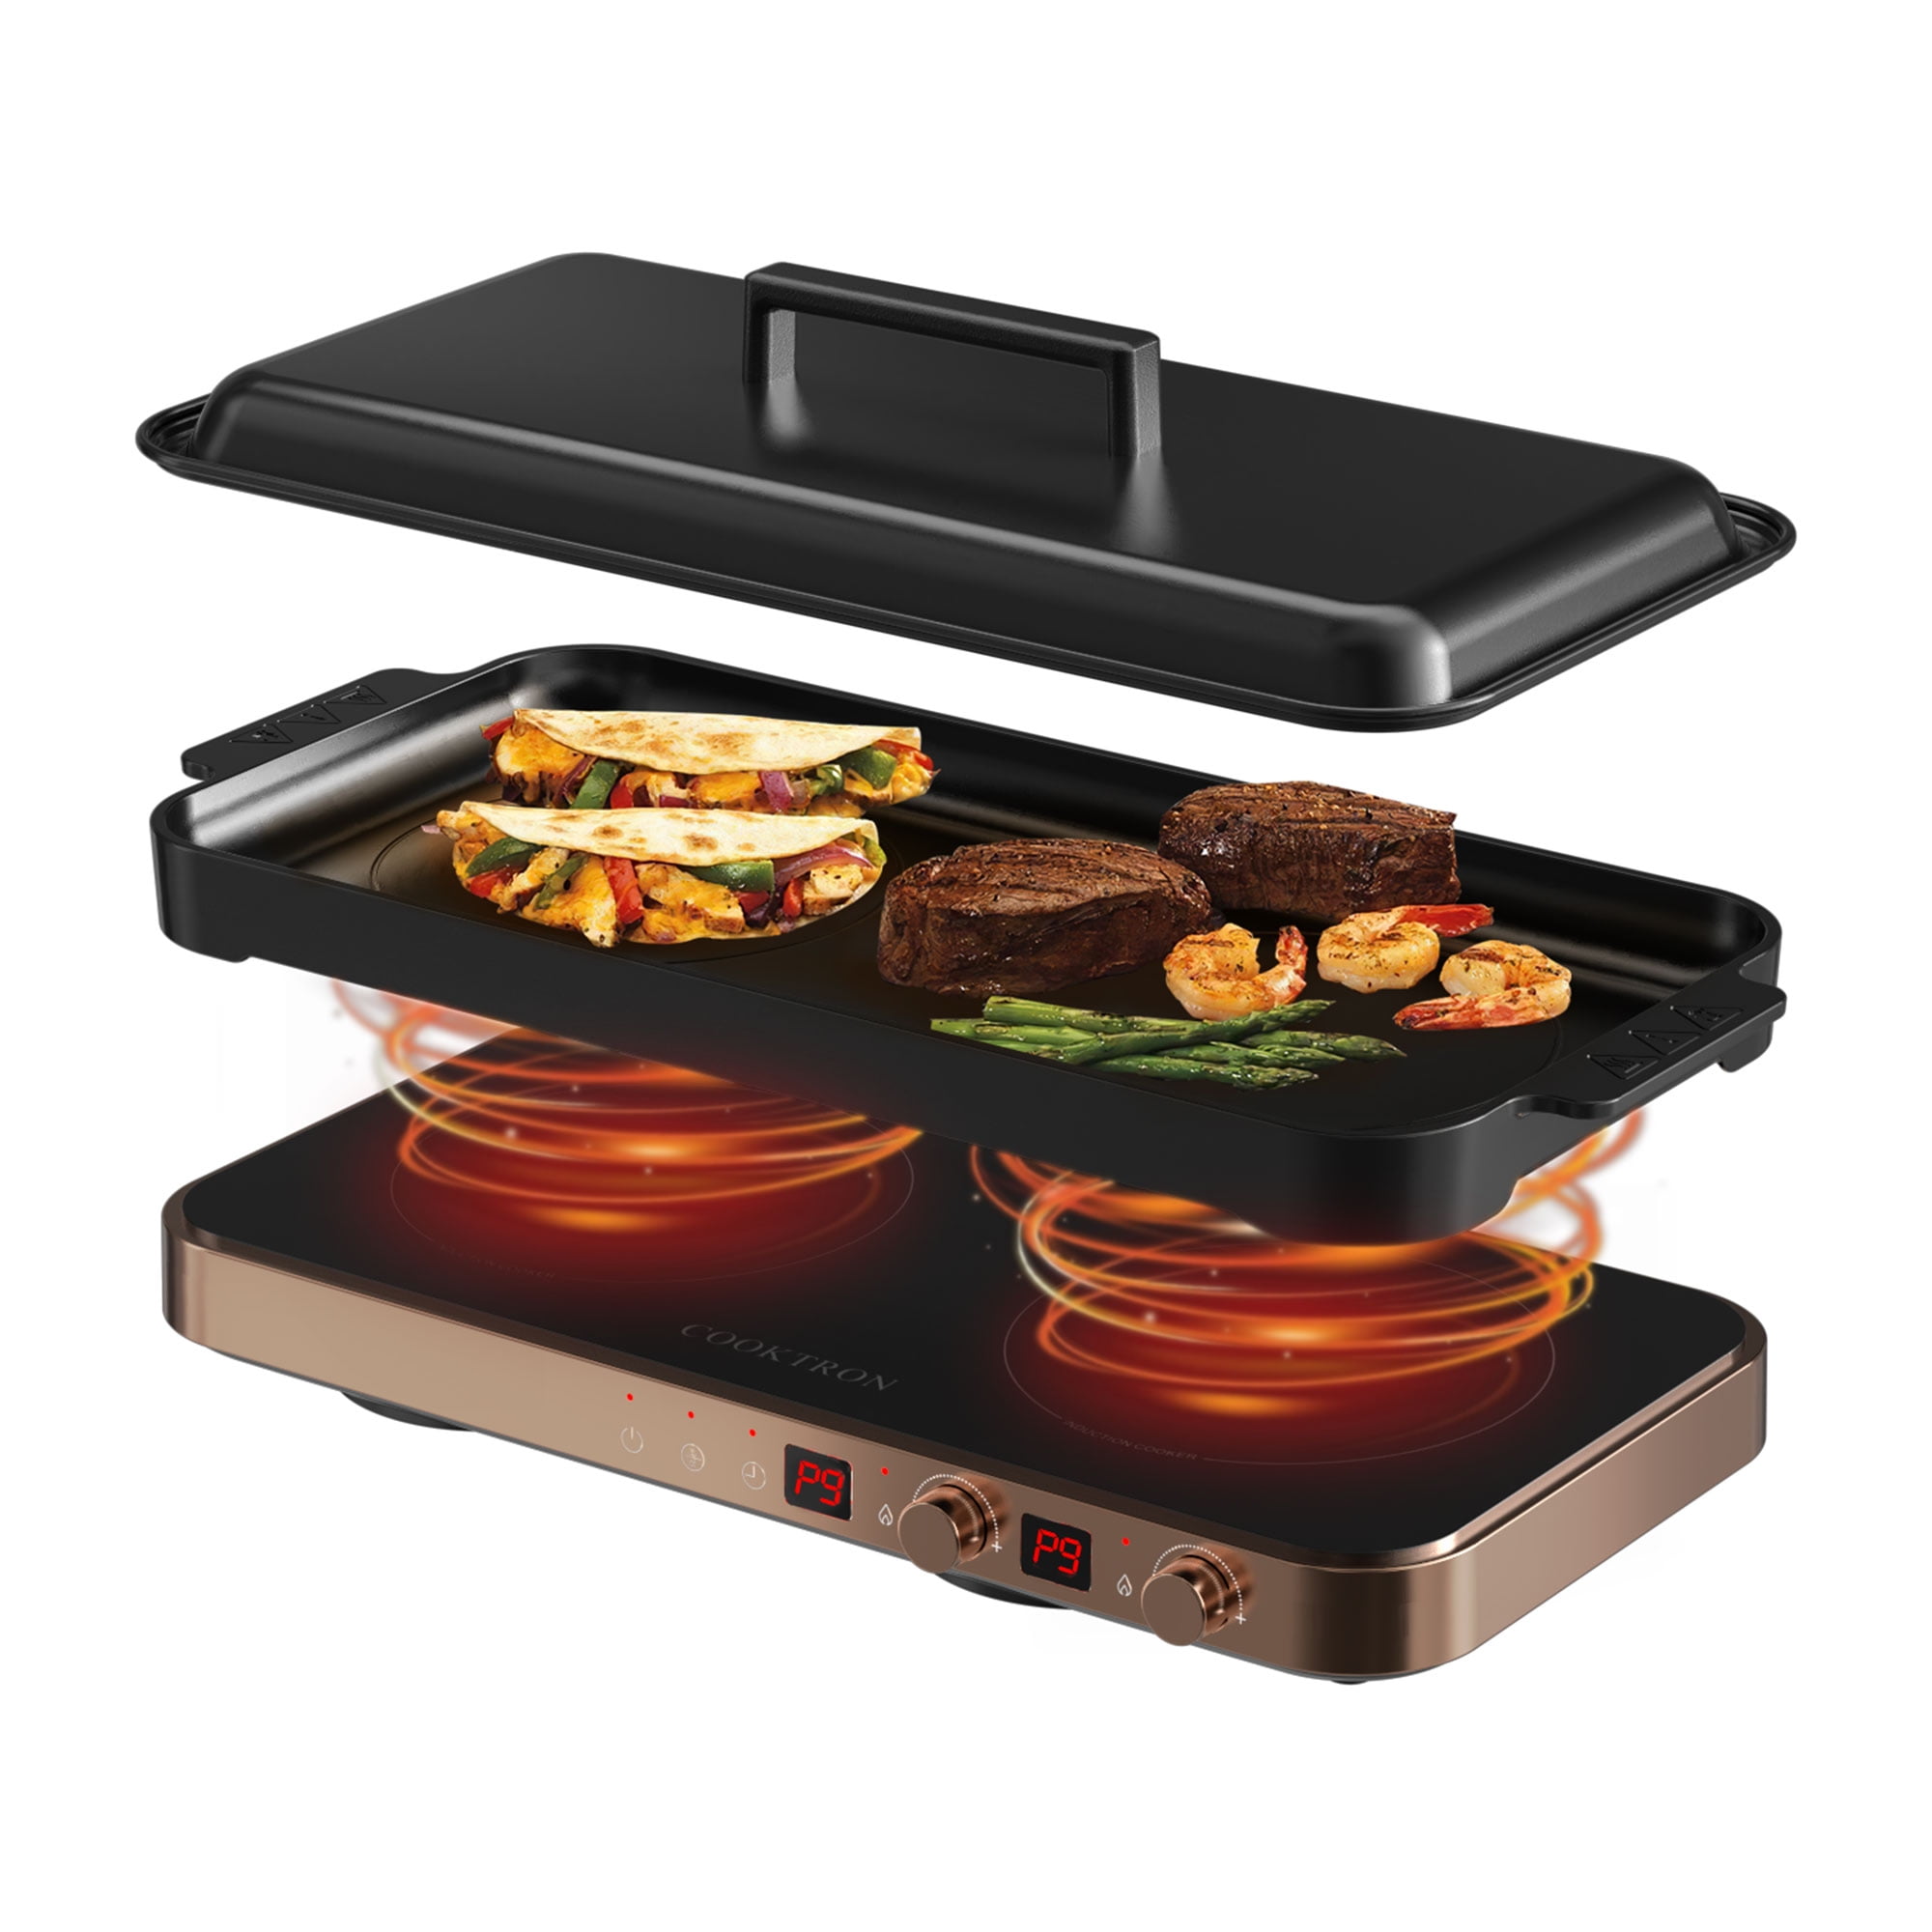 SUNAVO Hot Plates for Cooking, 1800W Electric Double Burner with Handles, 6  Power Levels Stainless Steel Hot Plate for Kitchen Camping RV Cast Iron